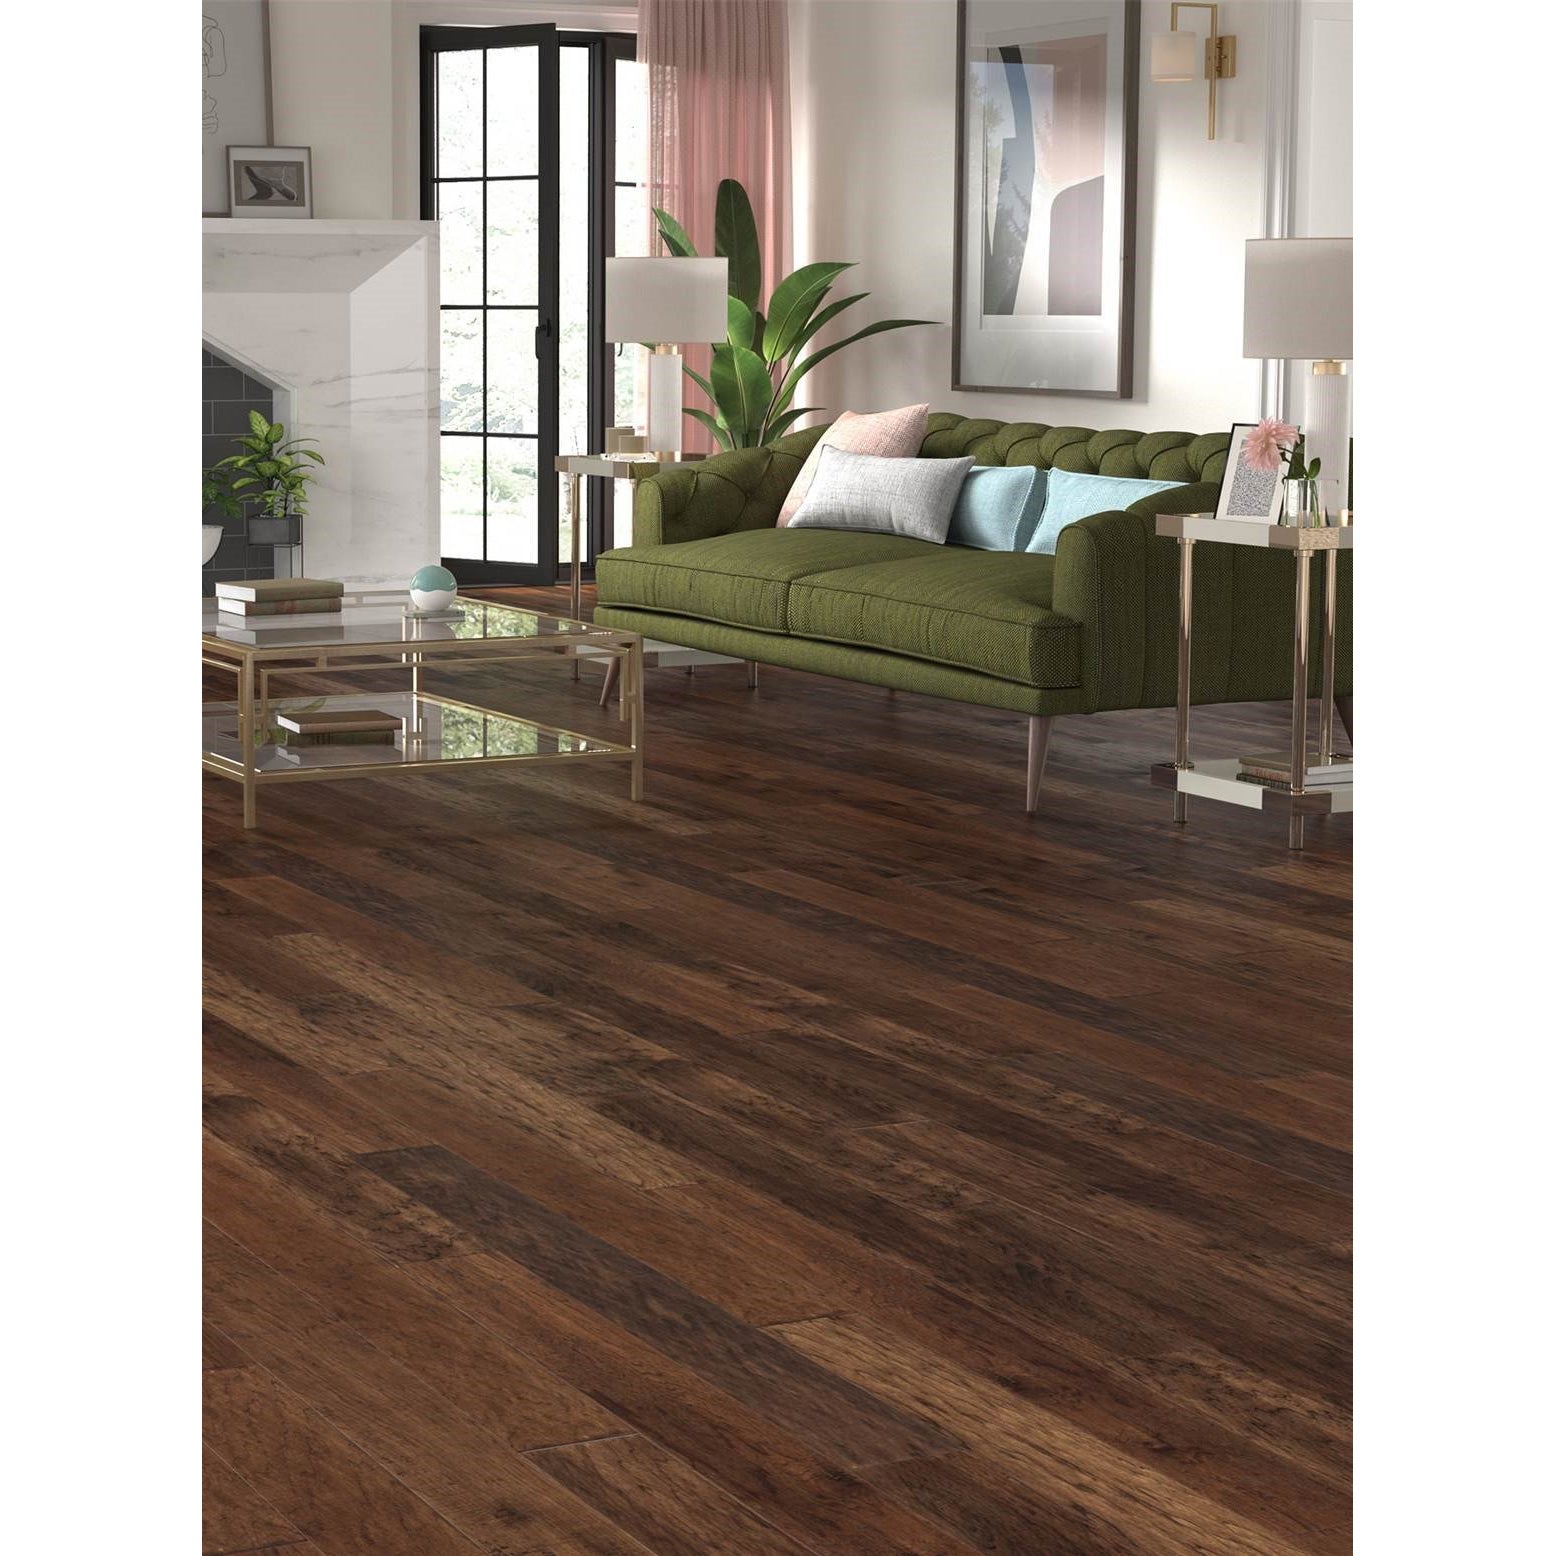 LM Flooring - River Ranch Collection - Almond Hickory